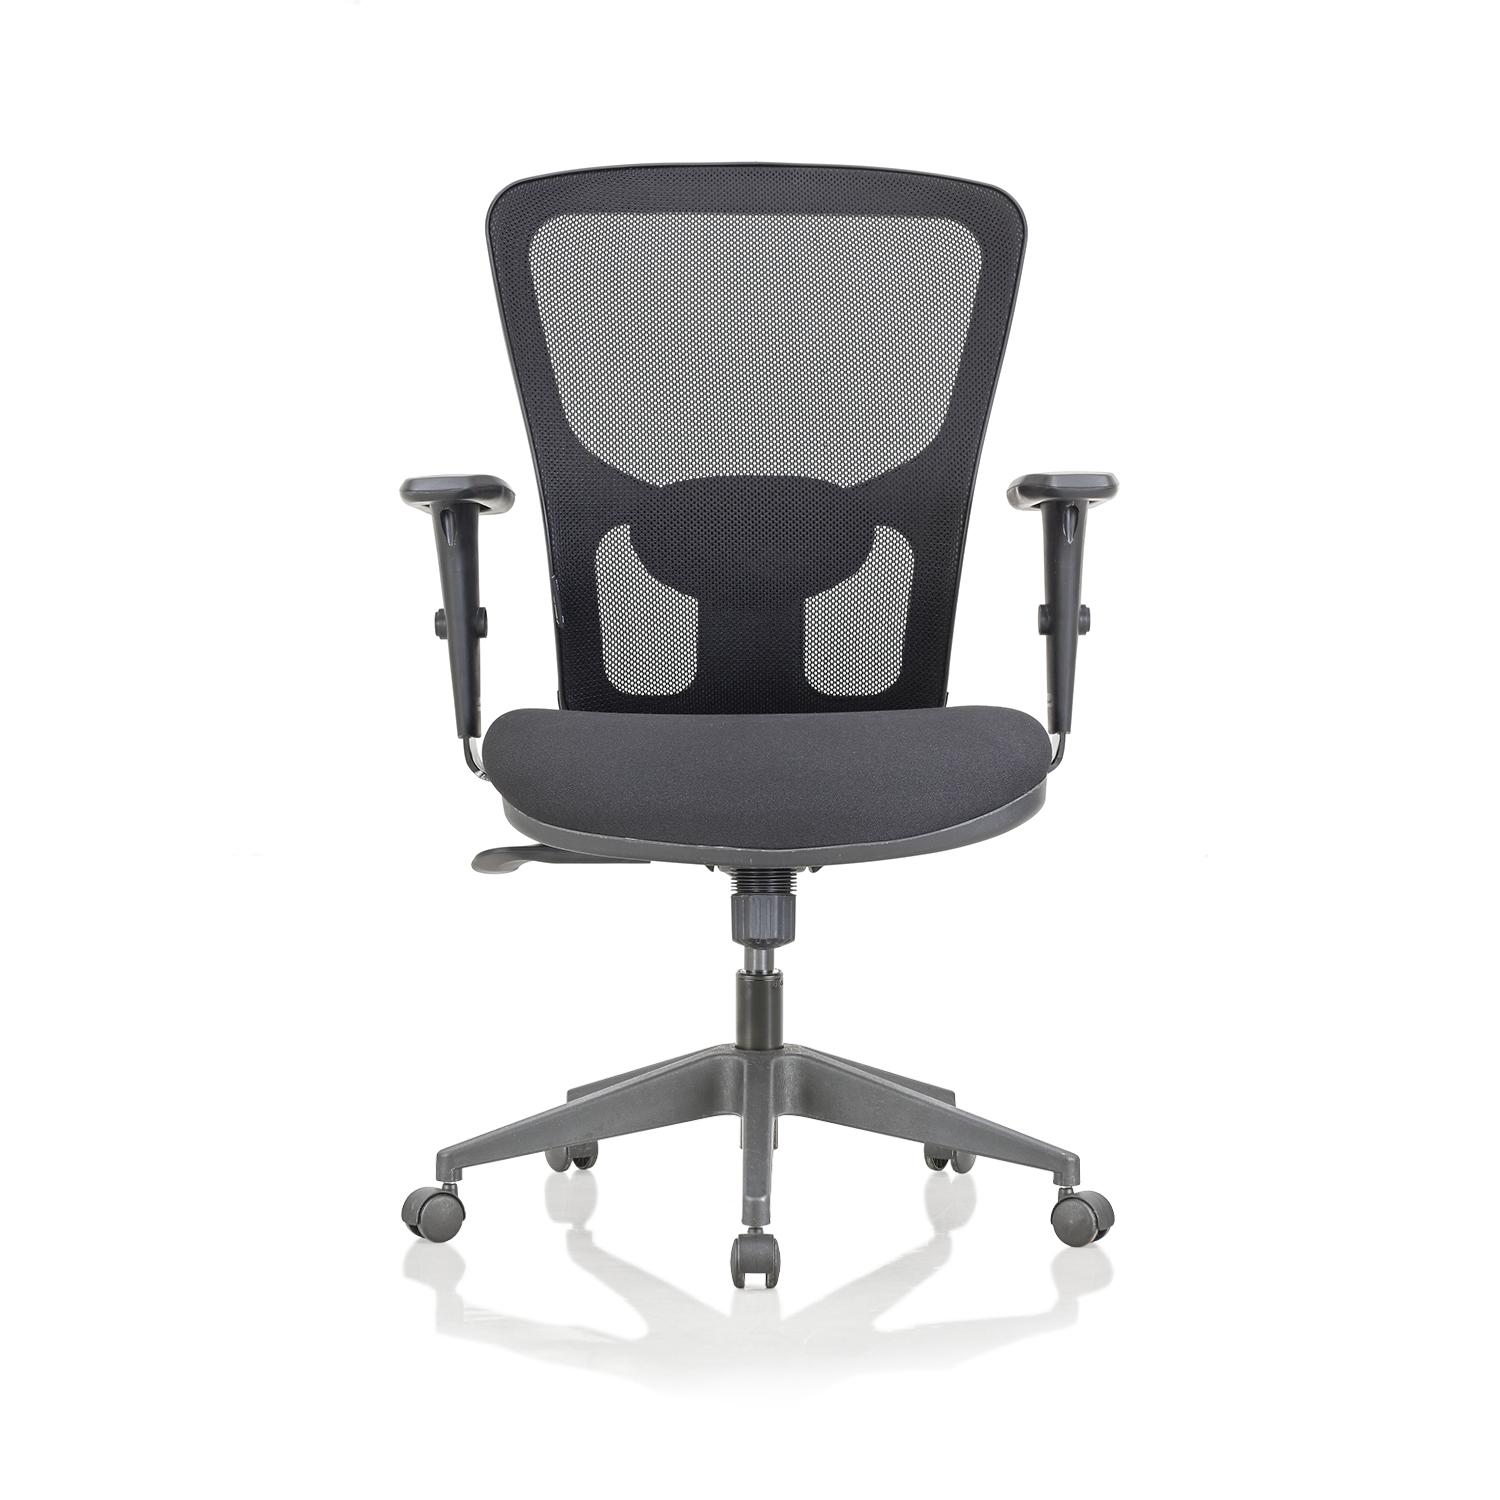 ASTRO OFFICE CHAIR